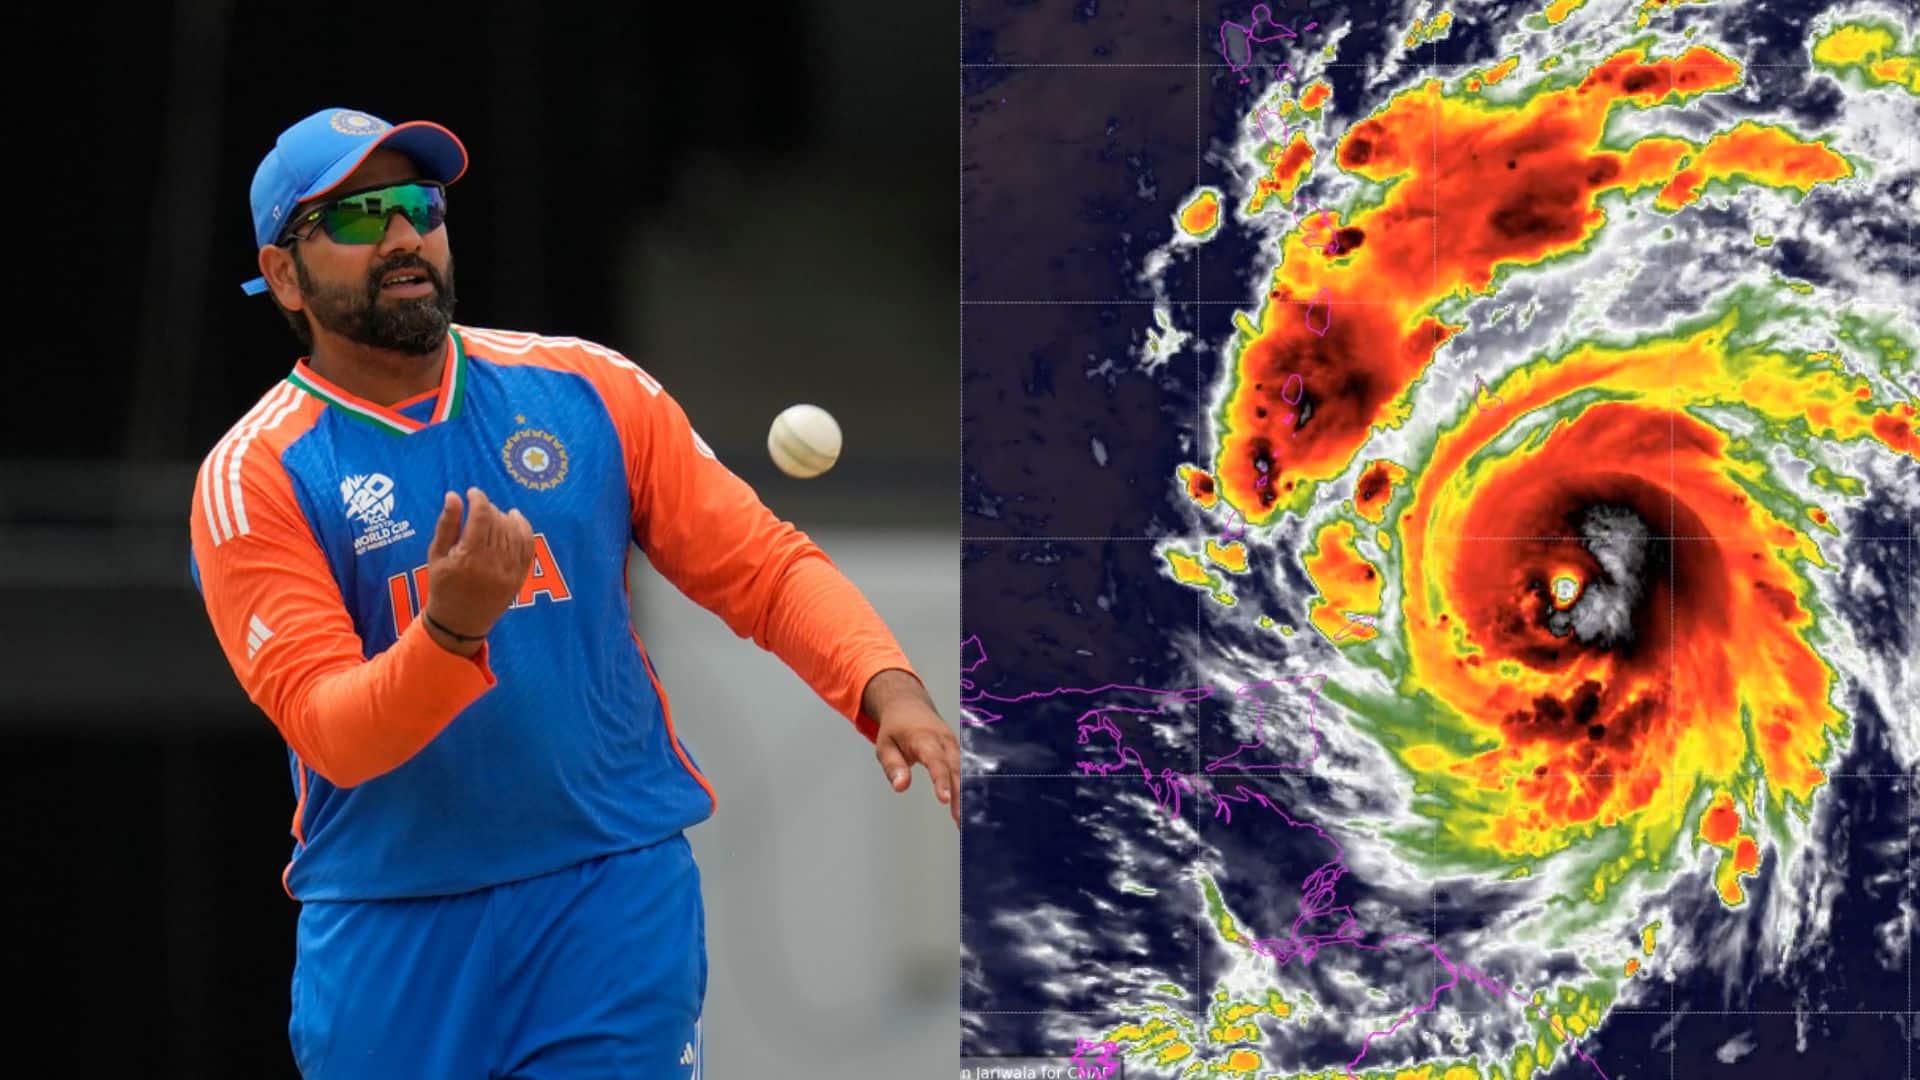 BCCI To Airlift Indian Team As Cyclone 'Beryl' Hits Barbados After T20 World Cup: Reports